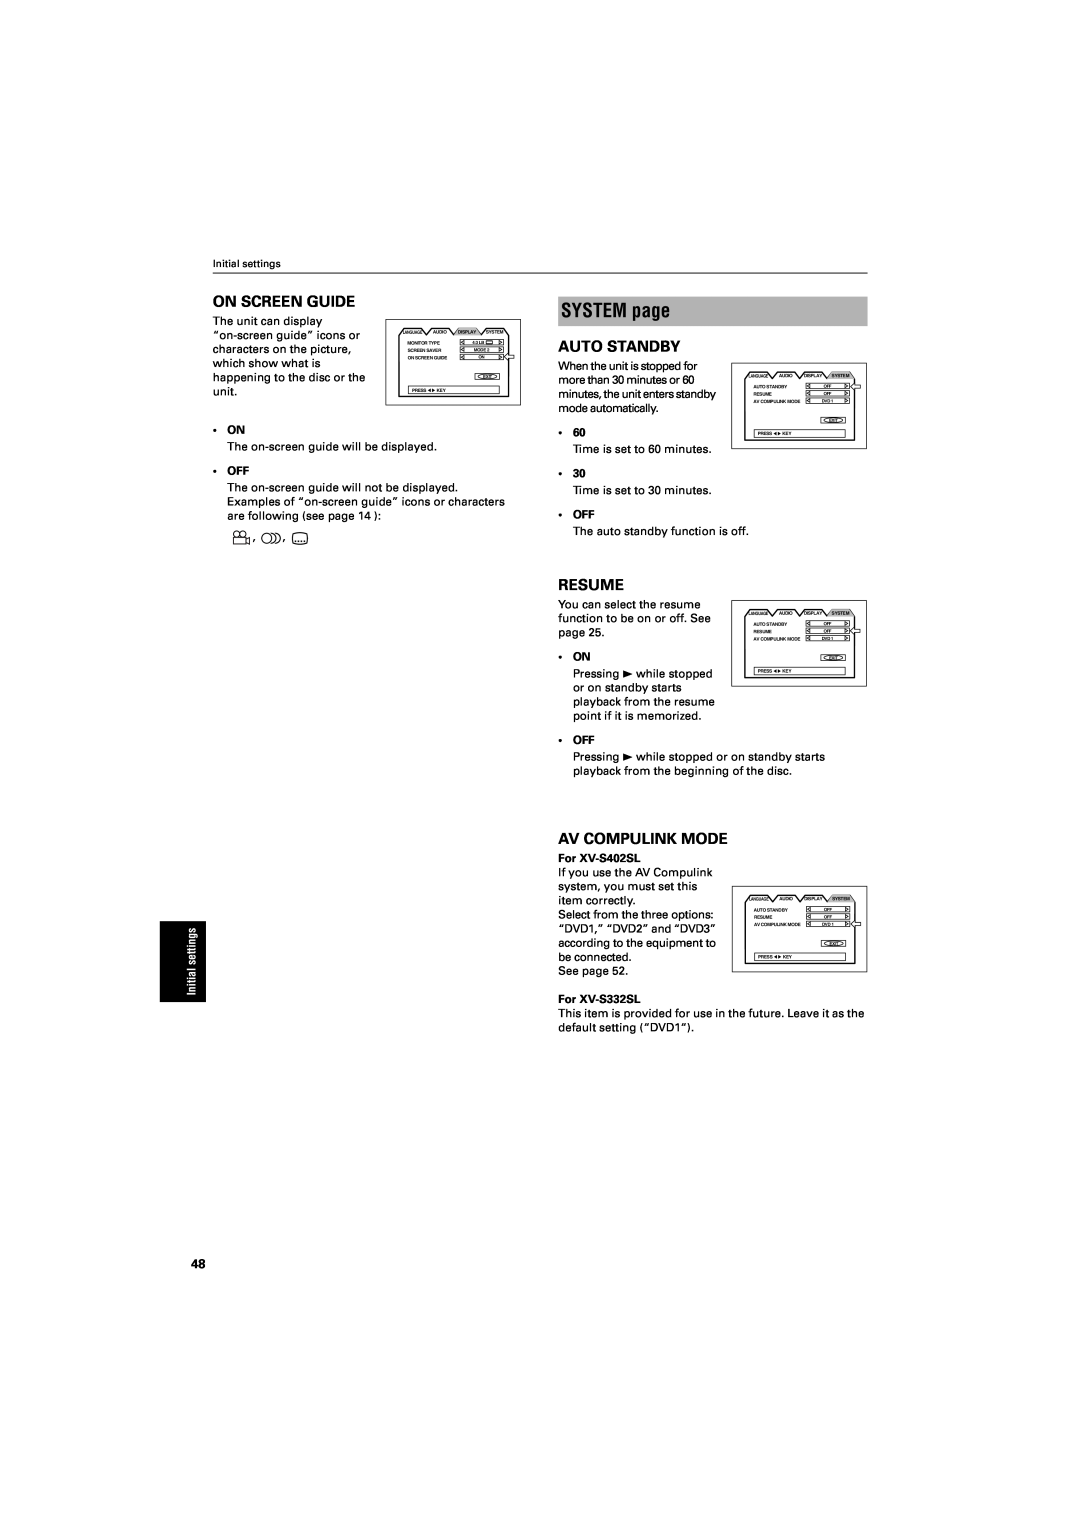 JVC GNT0013-014A SYSTEM page, On Screen Guide, Auto Standby, Resume, Av Compulink Mode, Initial settings, For XV-S402SL 